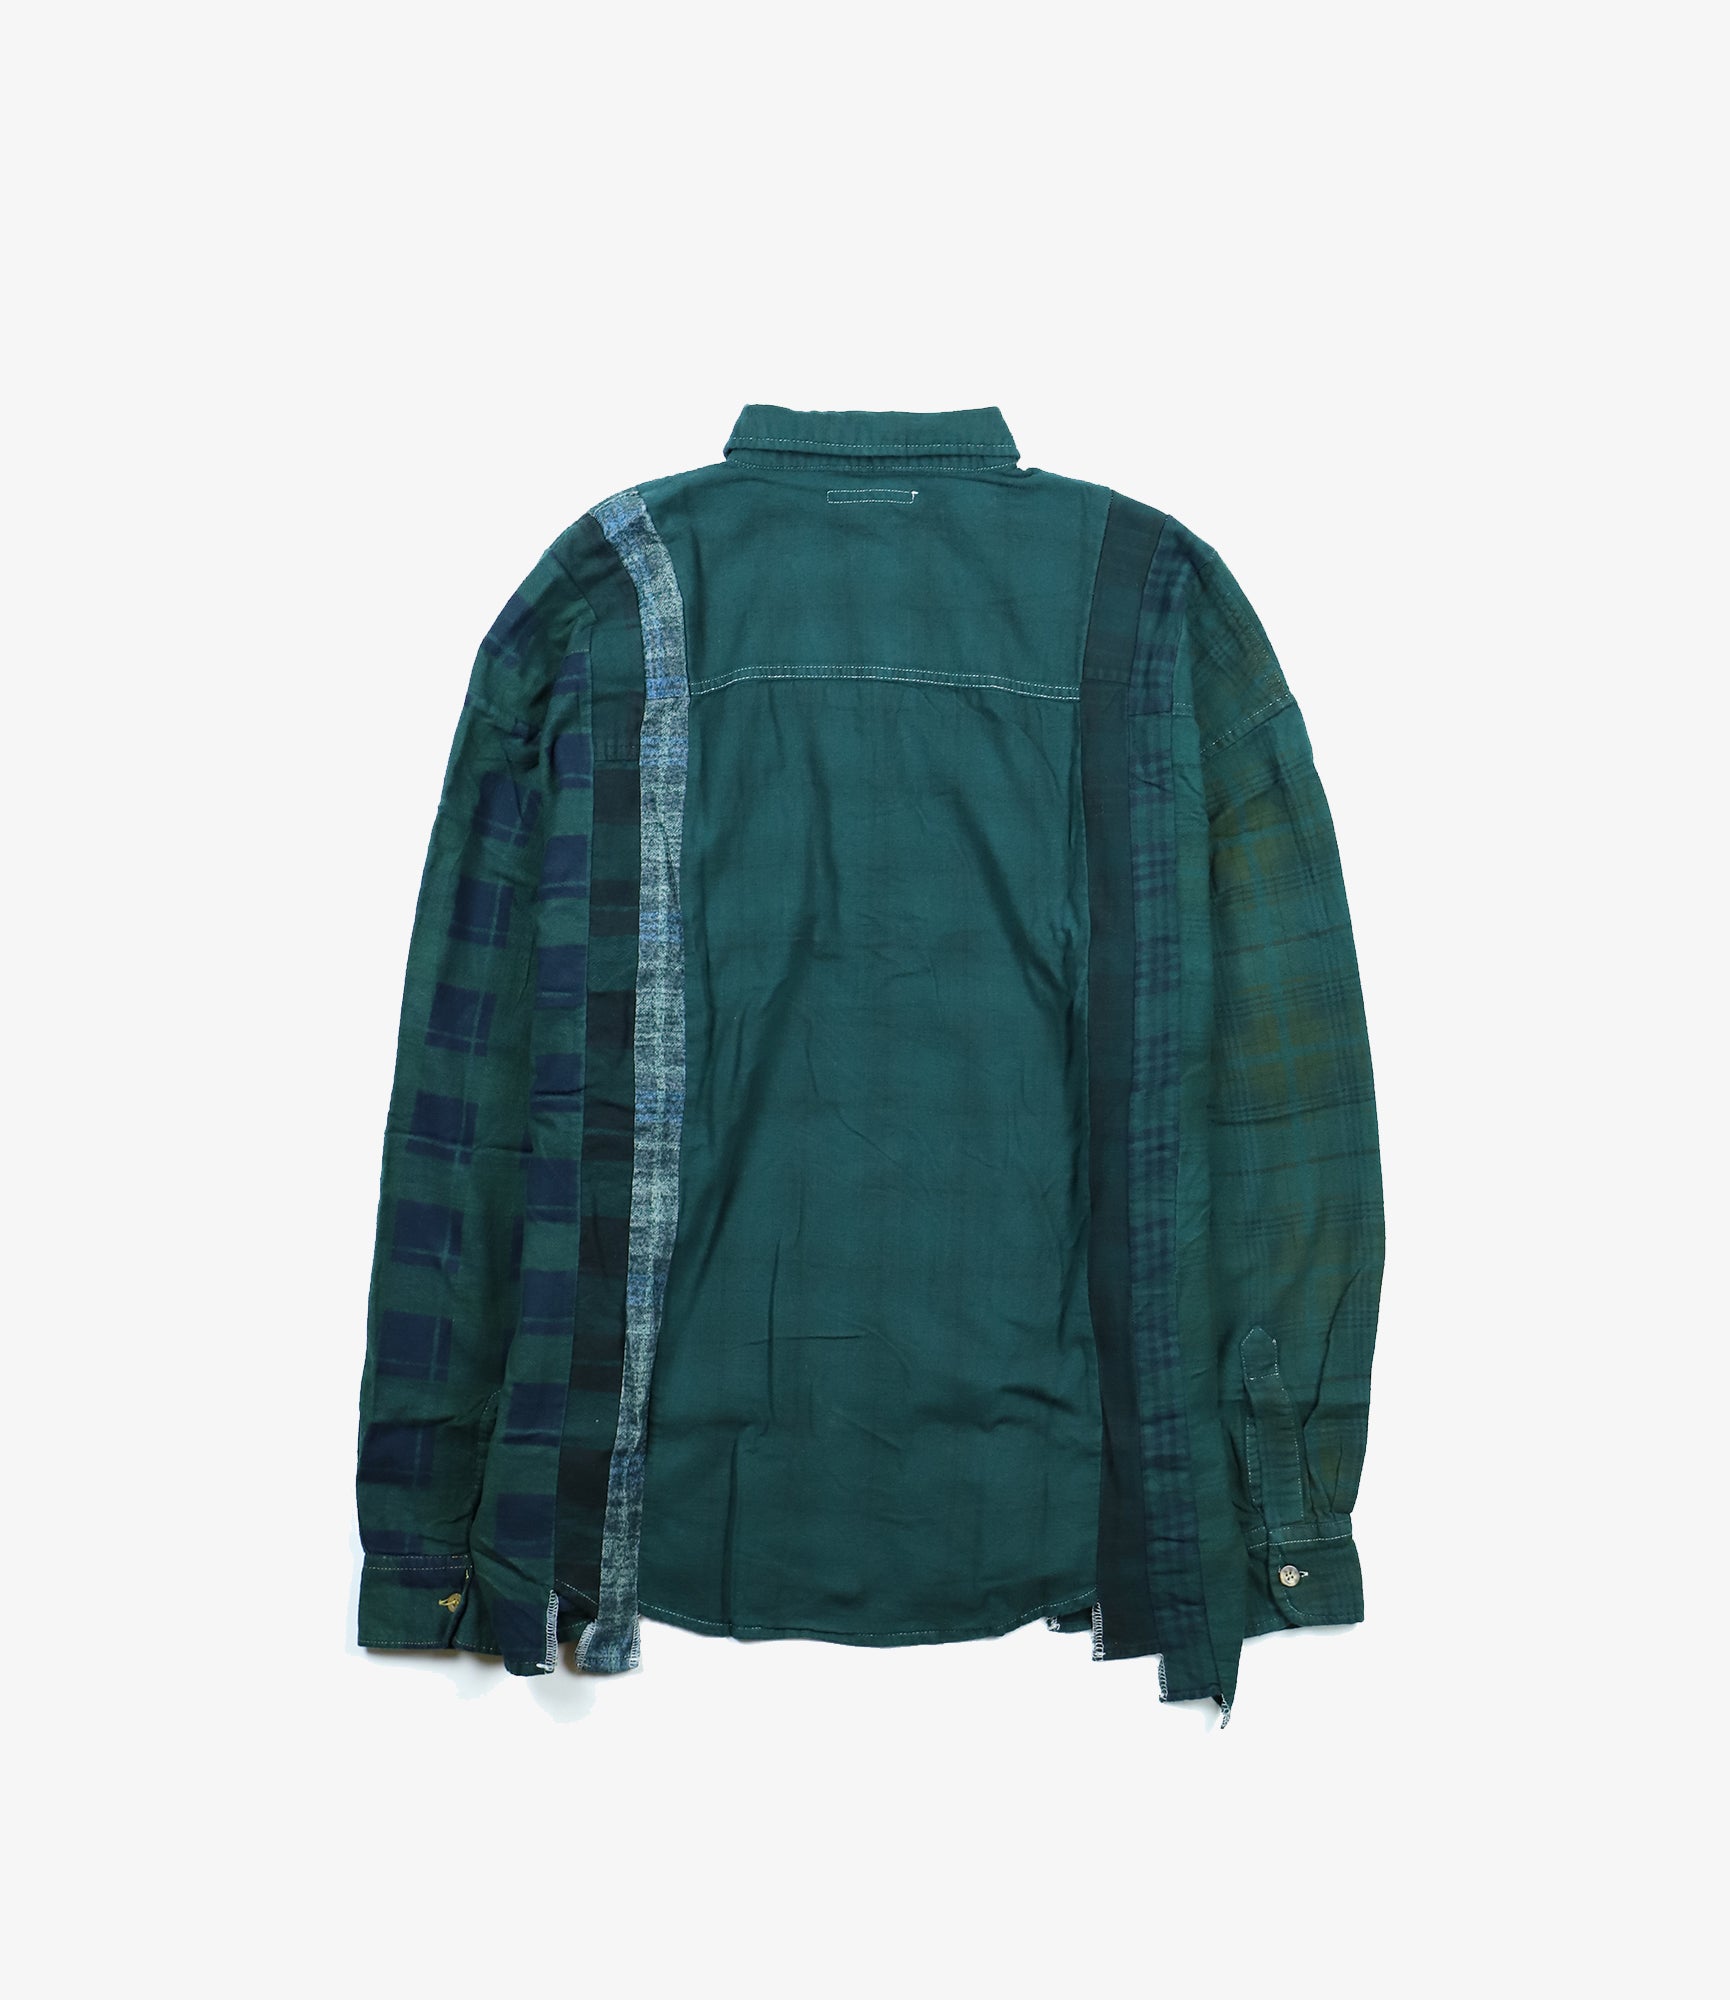 Rebuild by Needles Flannel Shirt - 7 Cuts Wide / Over Dye - Green